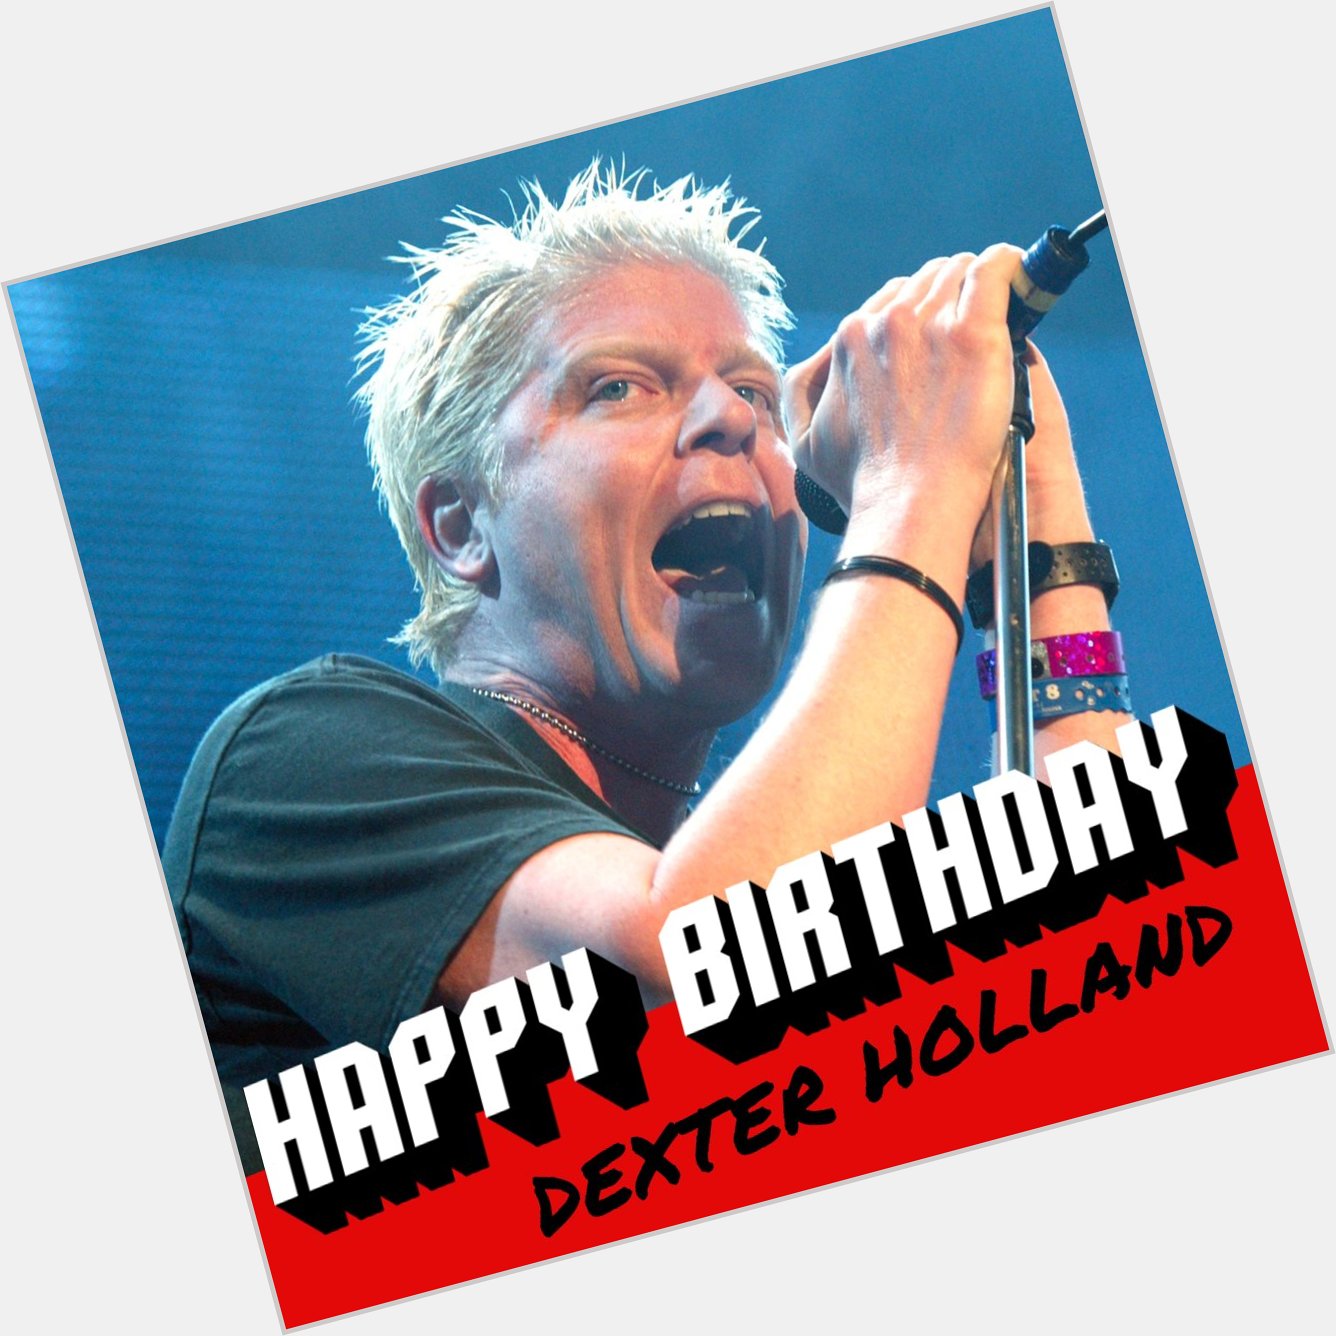 Happy birthday to the Dexter Holland!  